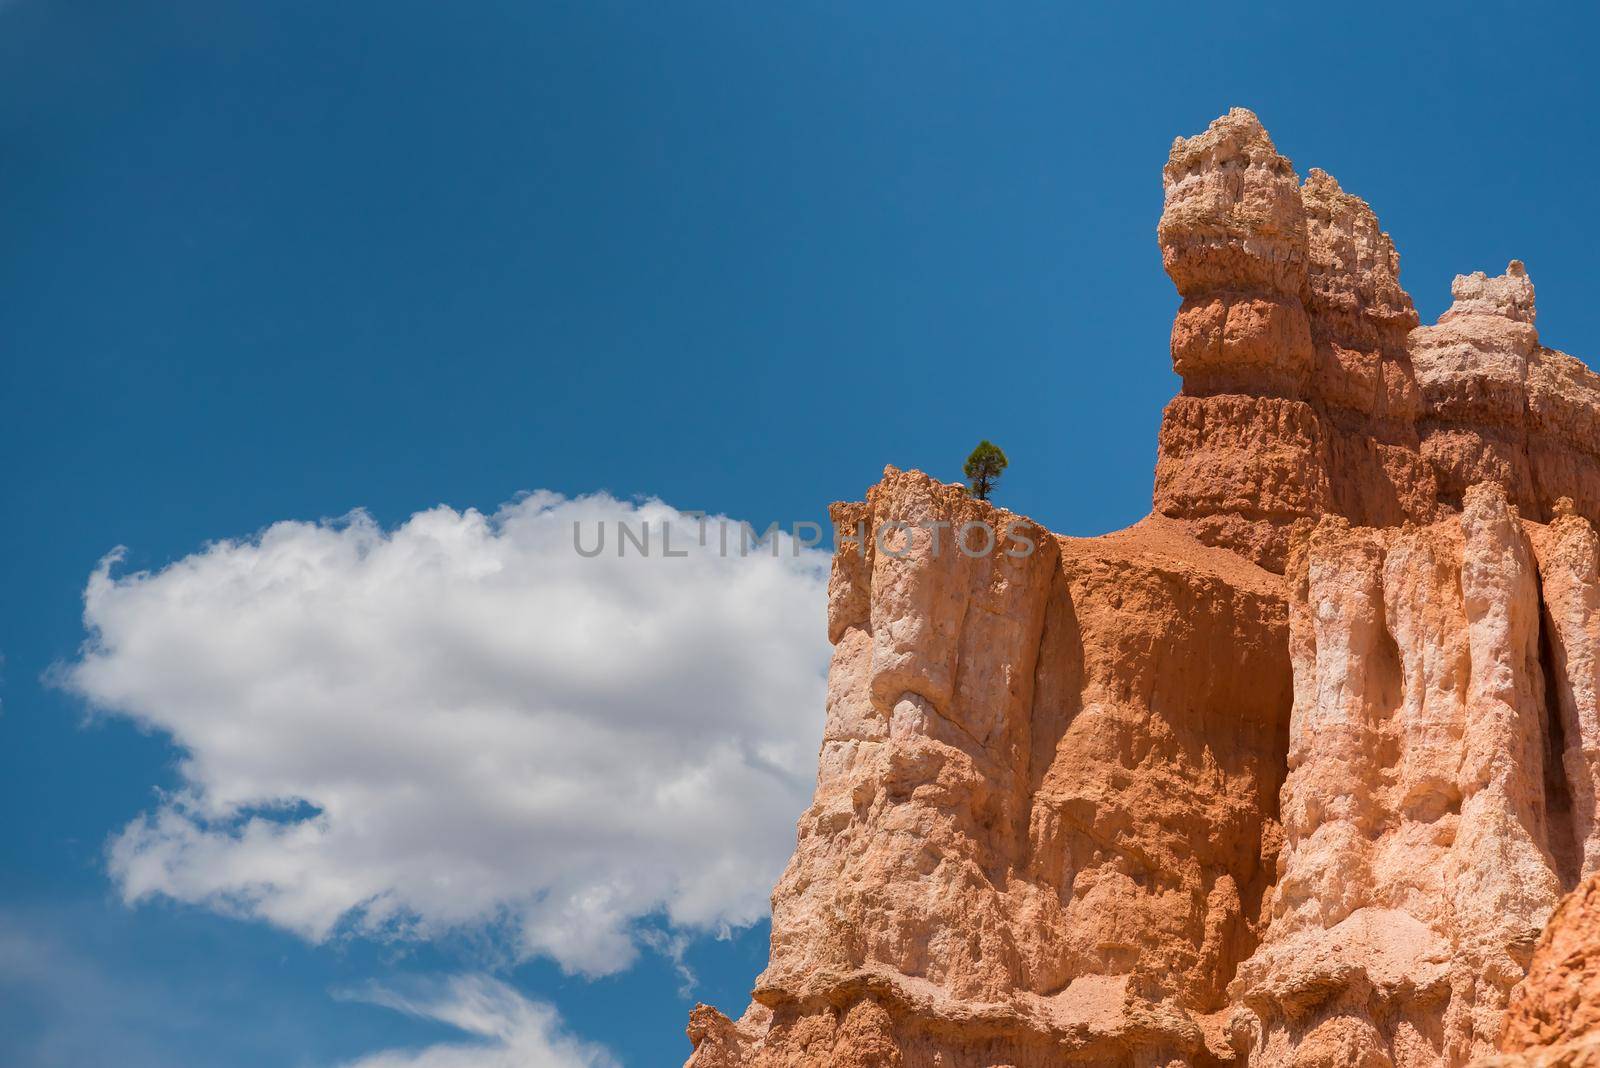 Bryce Canyon National Park hoodoo next to lone cloud.